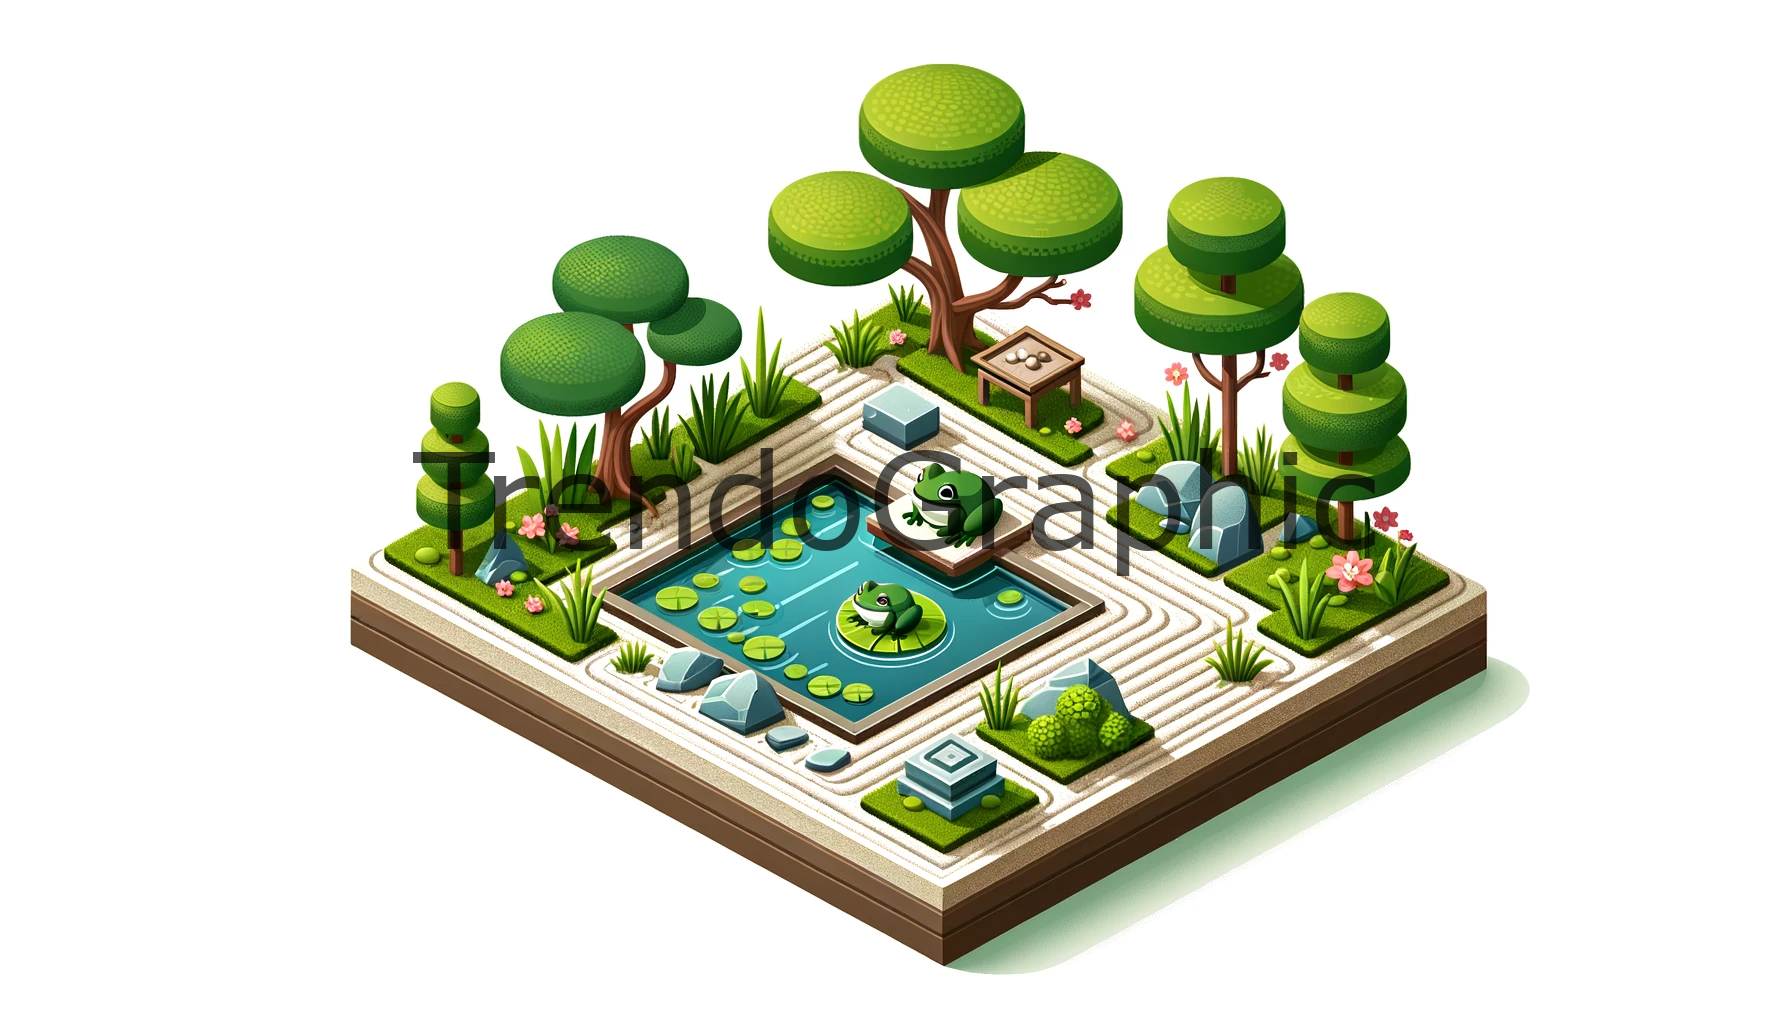 Tranquil Zen Garden with Frog: A Peaceful Oasis